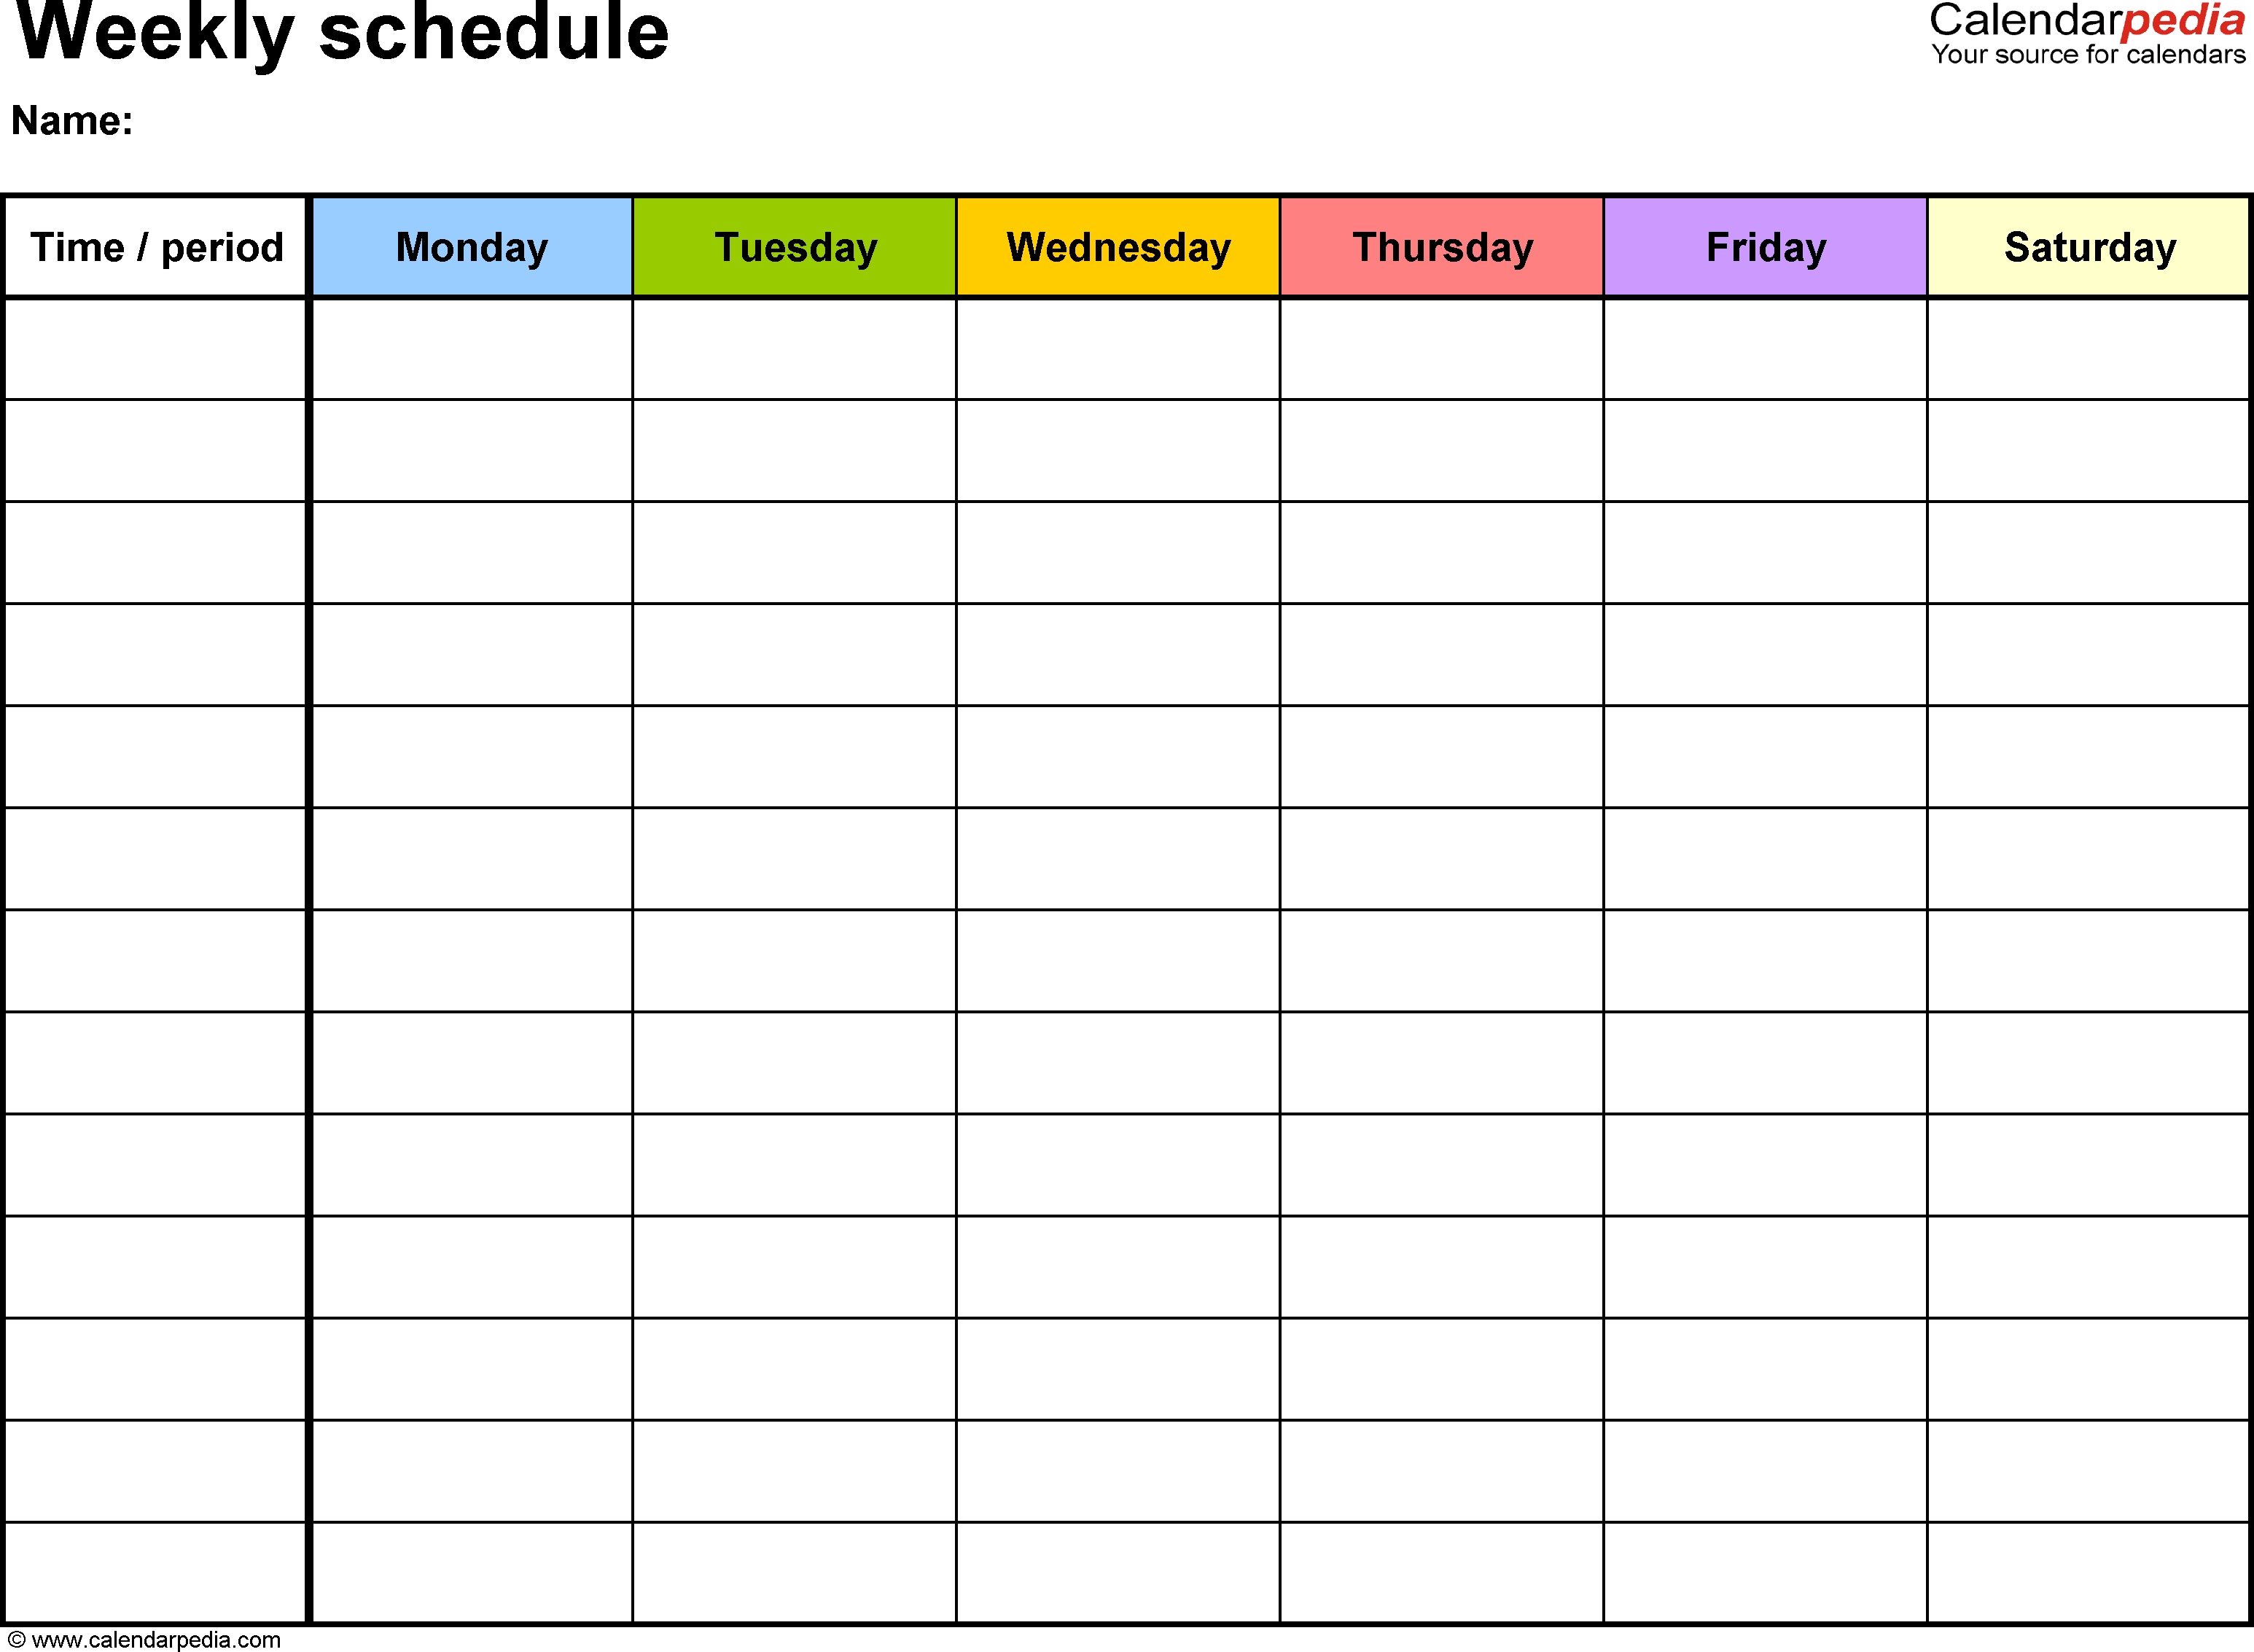 Free Weekly Schedule Templates For Word - 18 Templates-Printable Blank Monday Through Friday Calendars